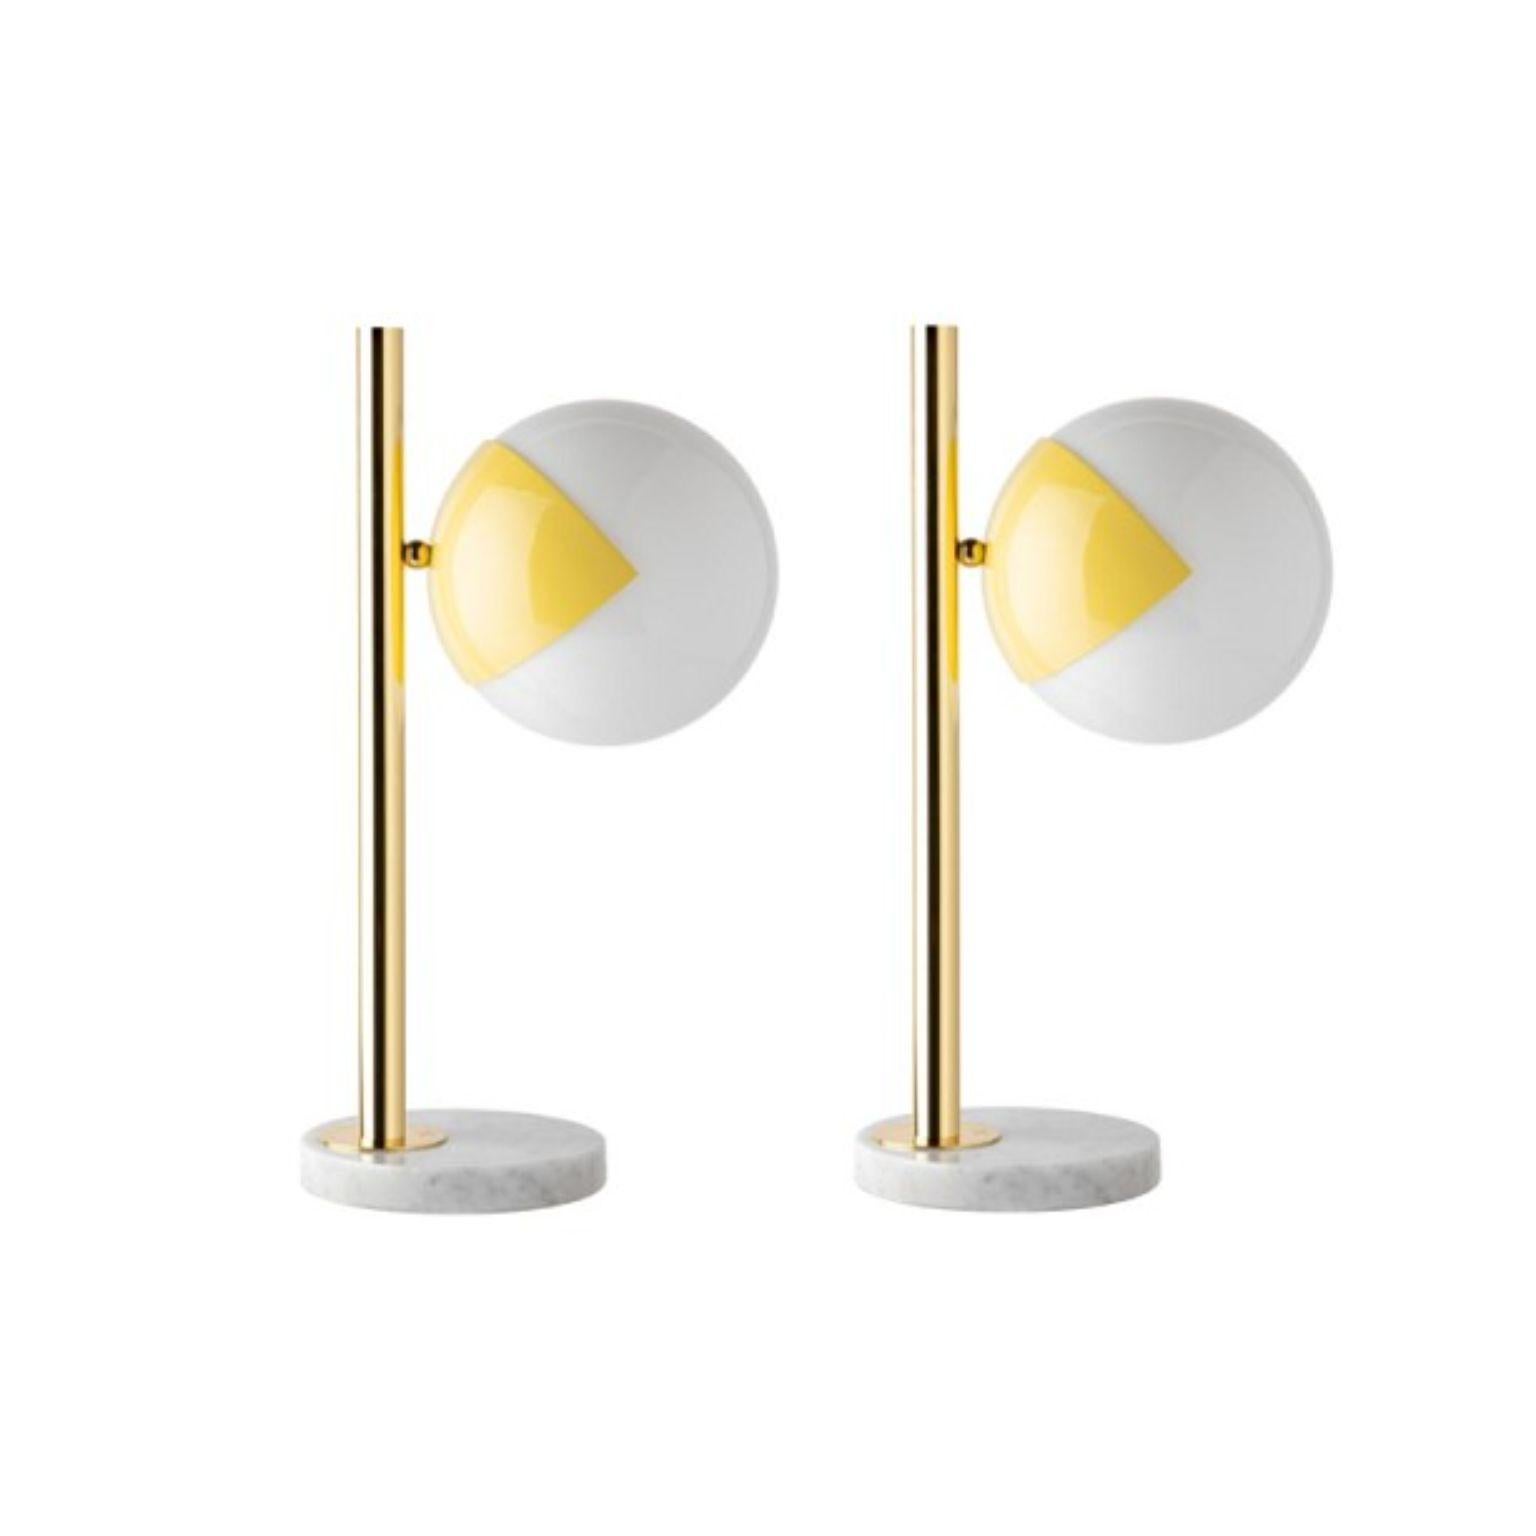 Yellow table lamp pop-up dimmable by Magic Circus Editions
Dimensions: Ø 22 x 30 x 53 cm 
Materials: Carrara marble base, smooth brass tube, glossy mouth blown glass
Also non-dimmable version available.

All our lamps can be wired according to